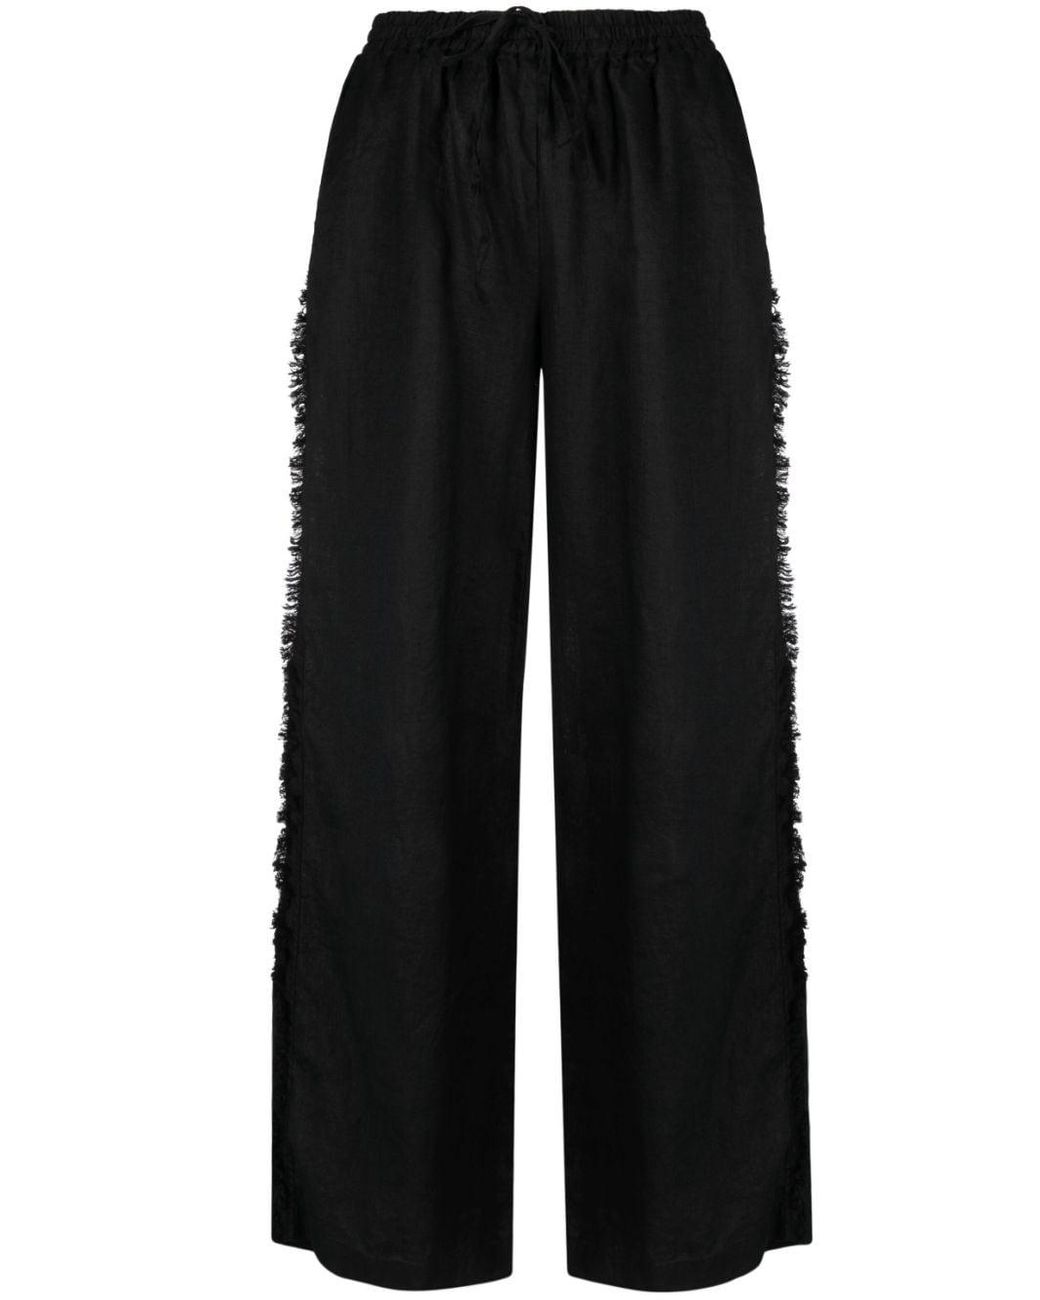 P.A.R.O.S.H. Linen Wide-leg Trousers in Black | Lyst